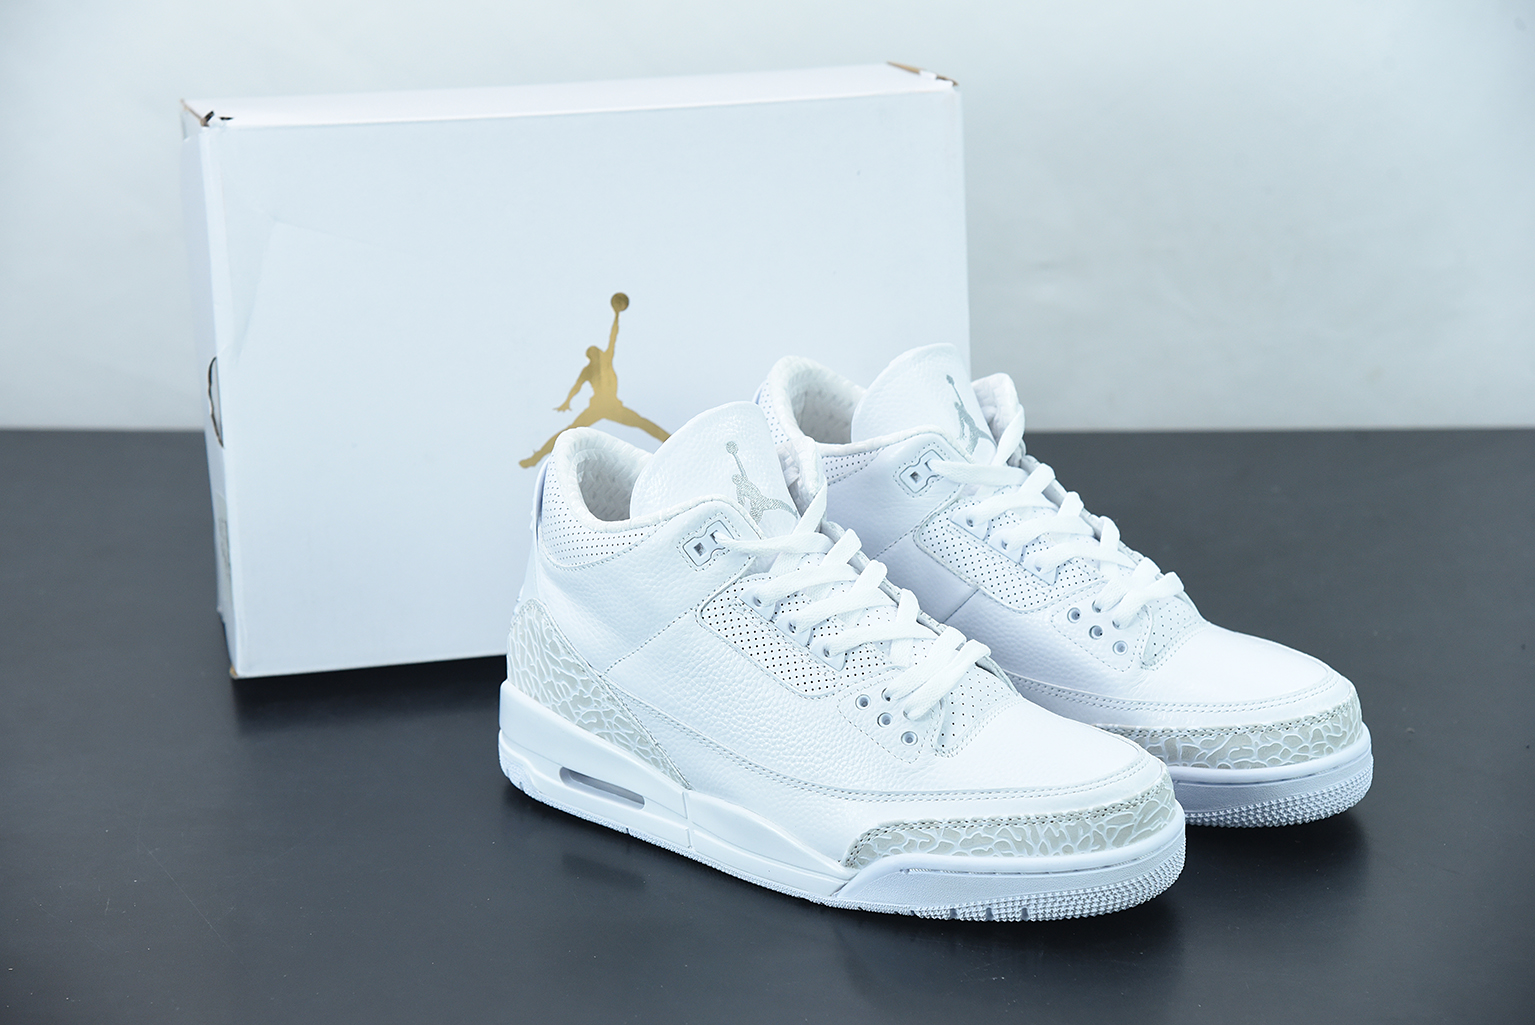 Ladder to call Correctly Air Jordan 3 Pure White 136064-111 For Sale – Fit Sporting Goods